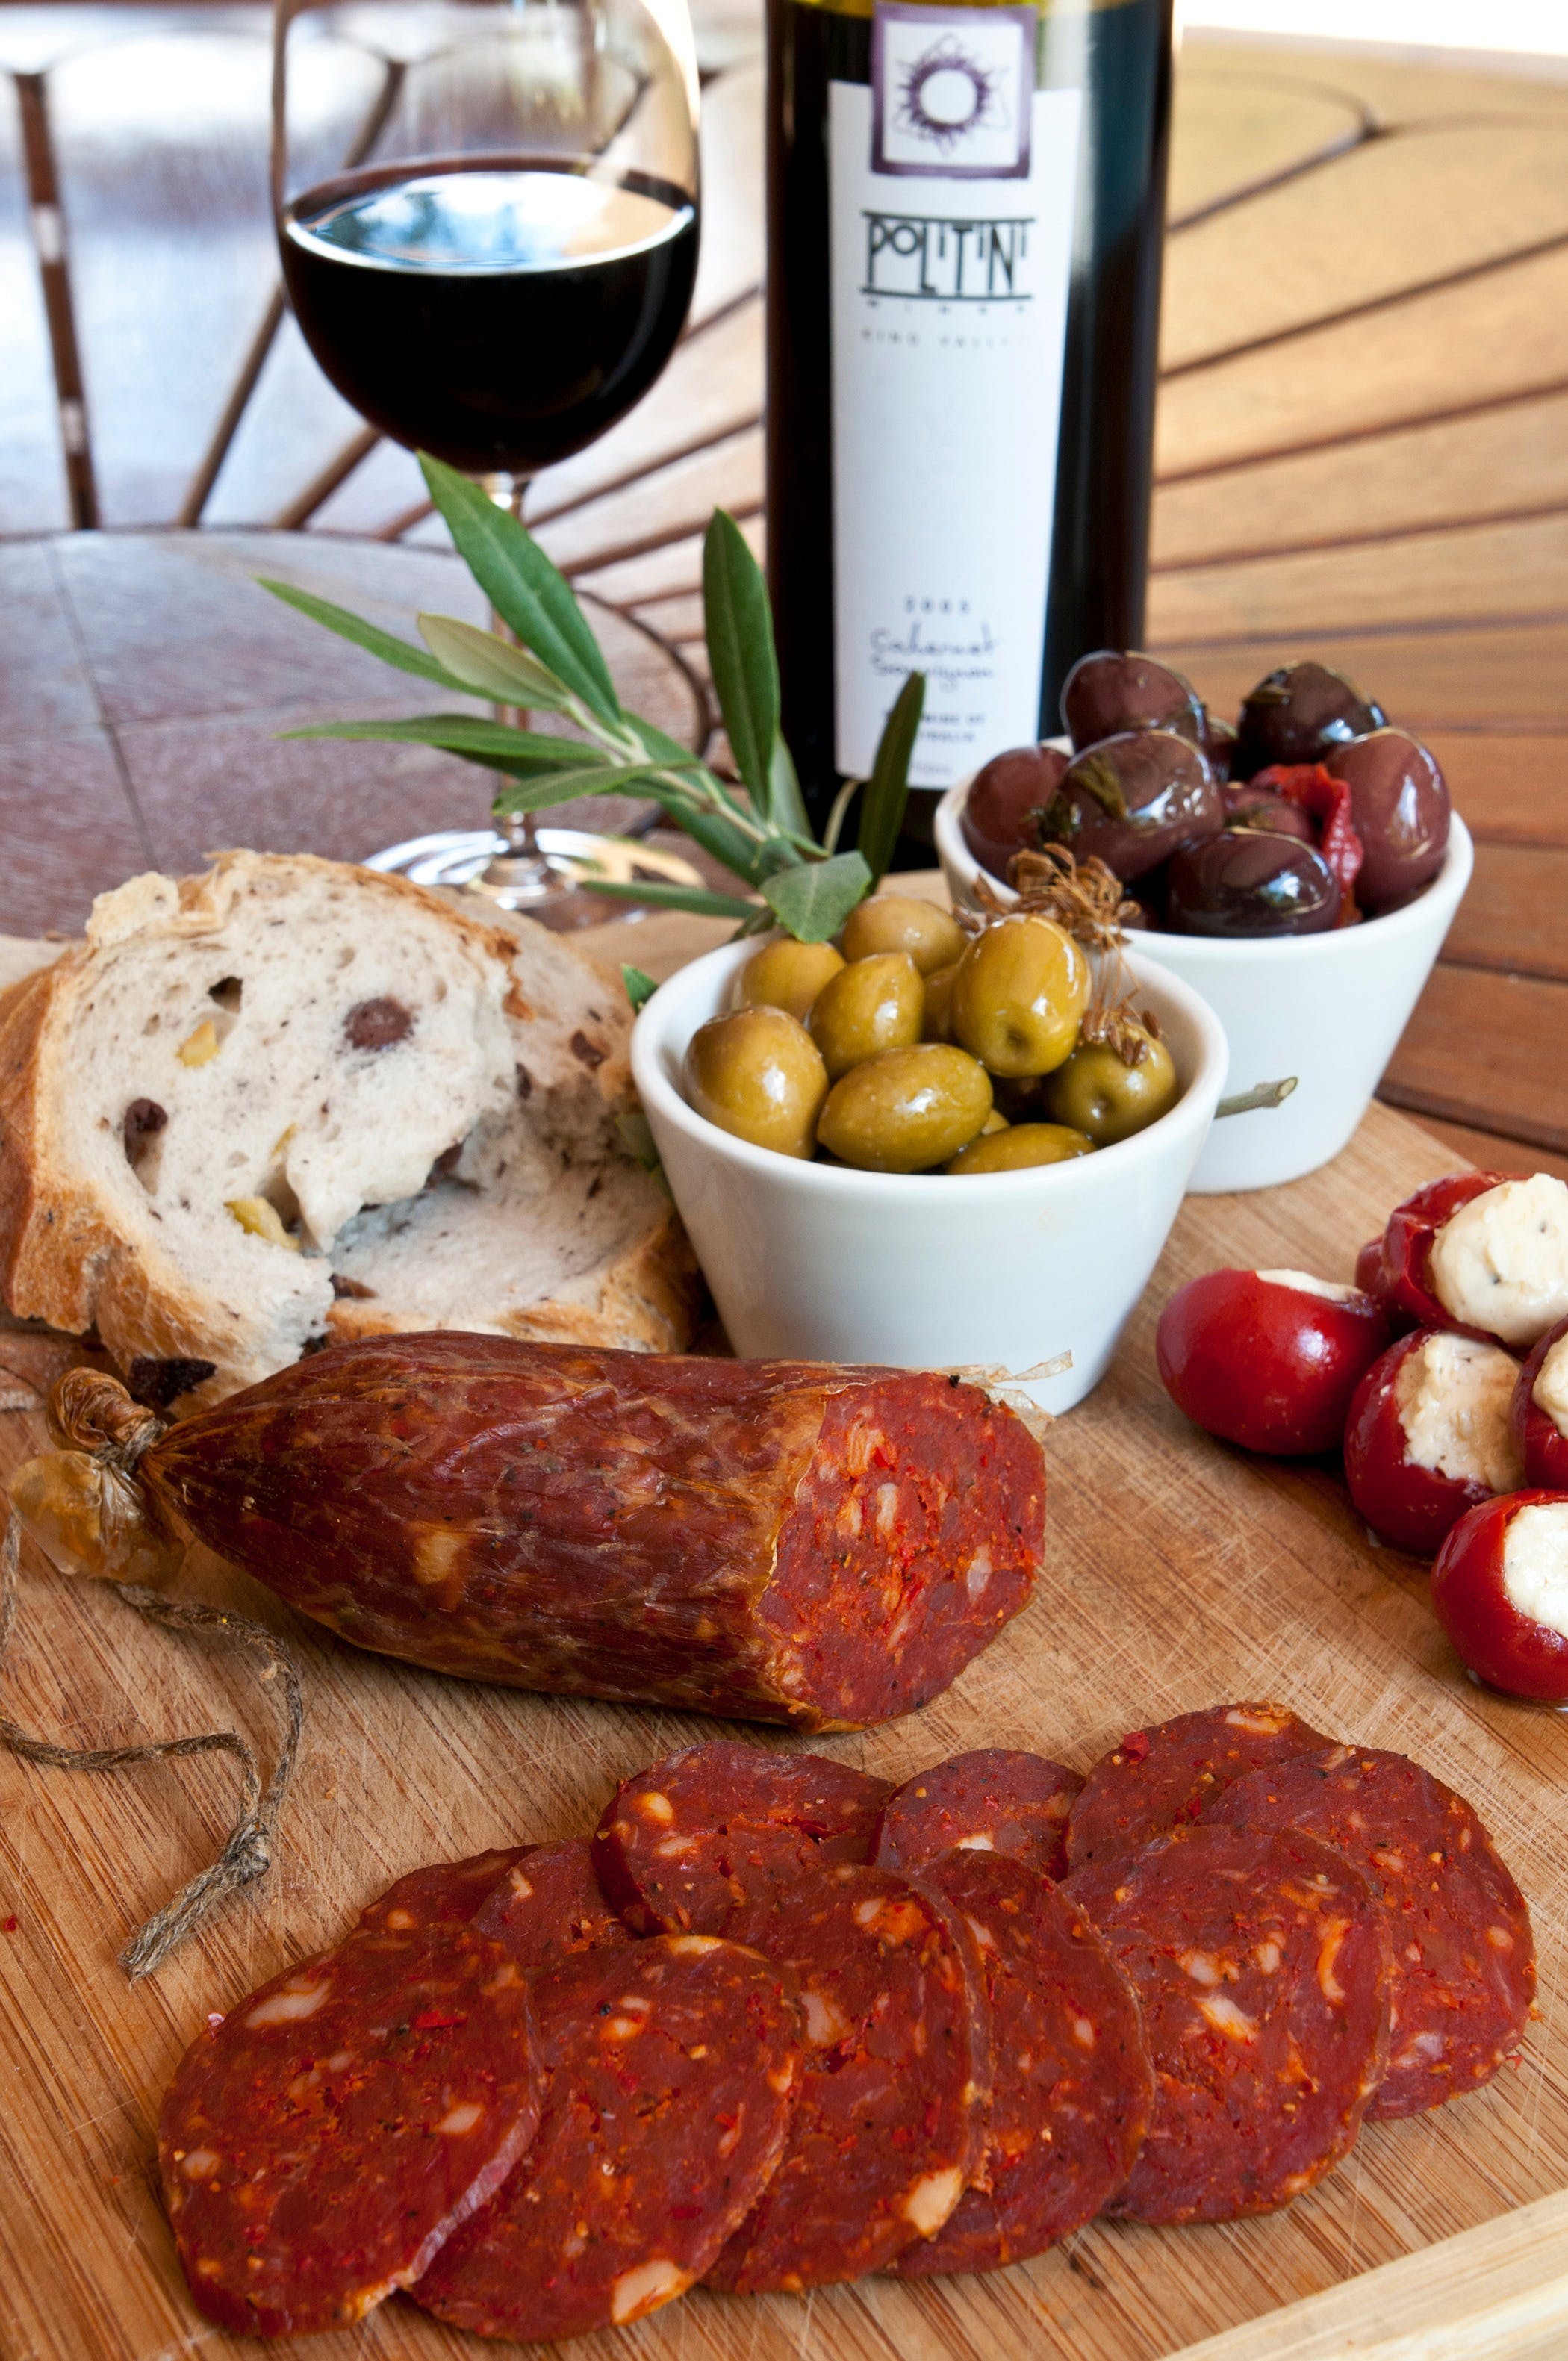 Salami and Salsicce Making classes at Politini Wines - Melbourne Tourism